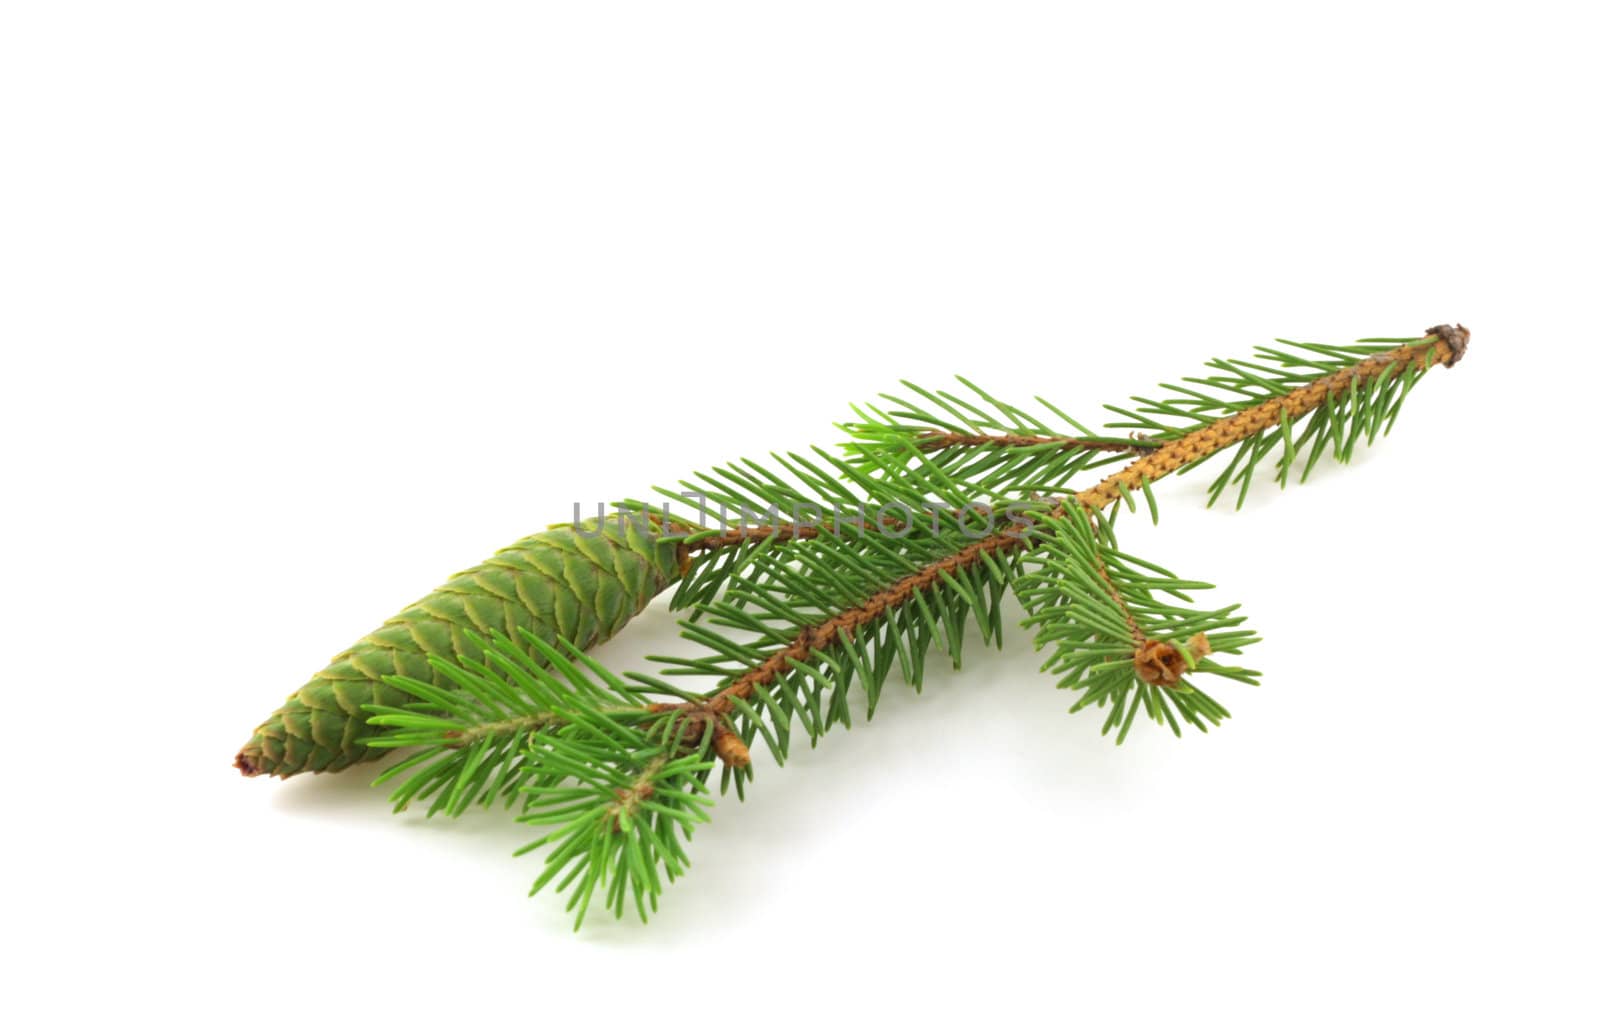 Twig of fir-tree with cone by sergpet